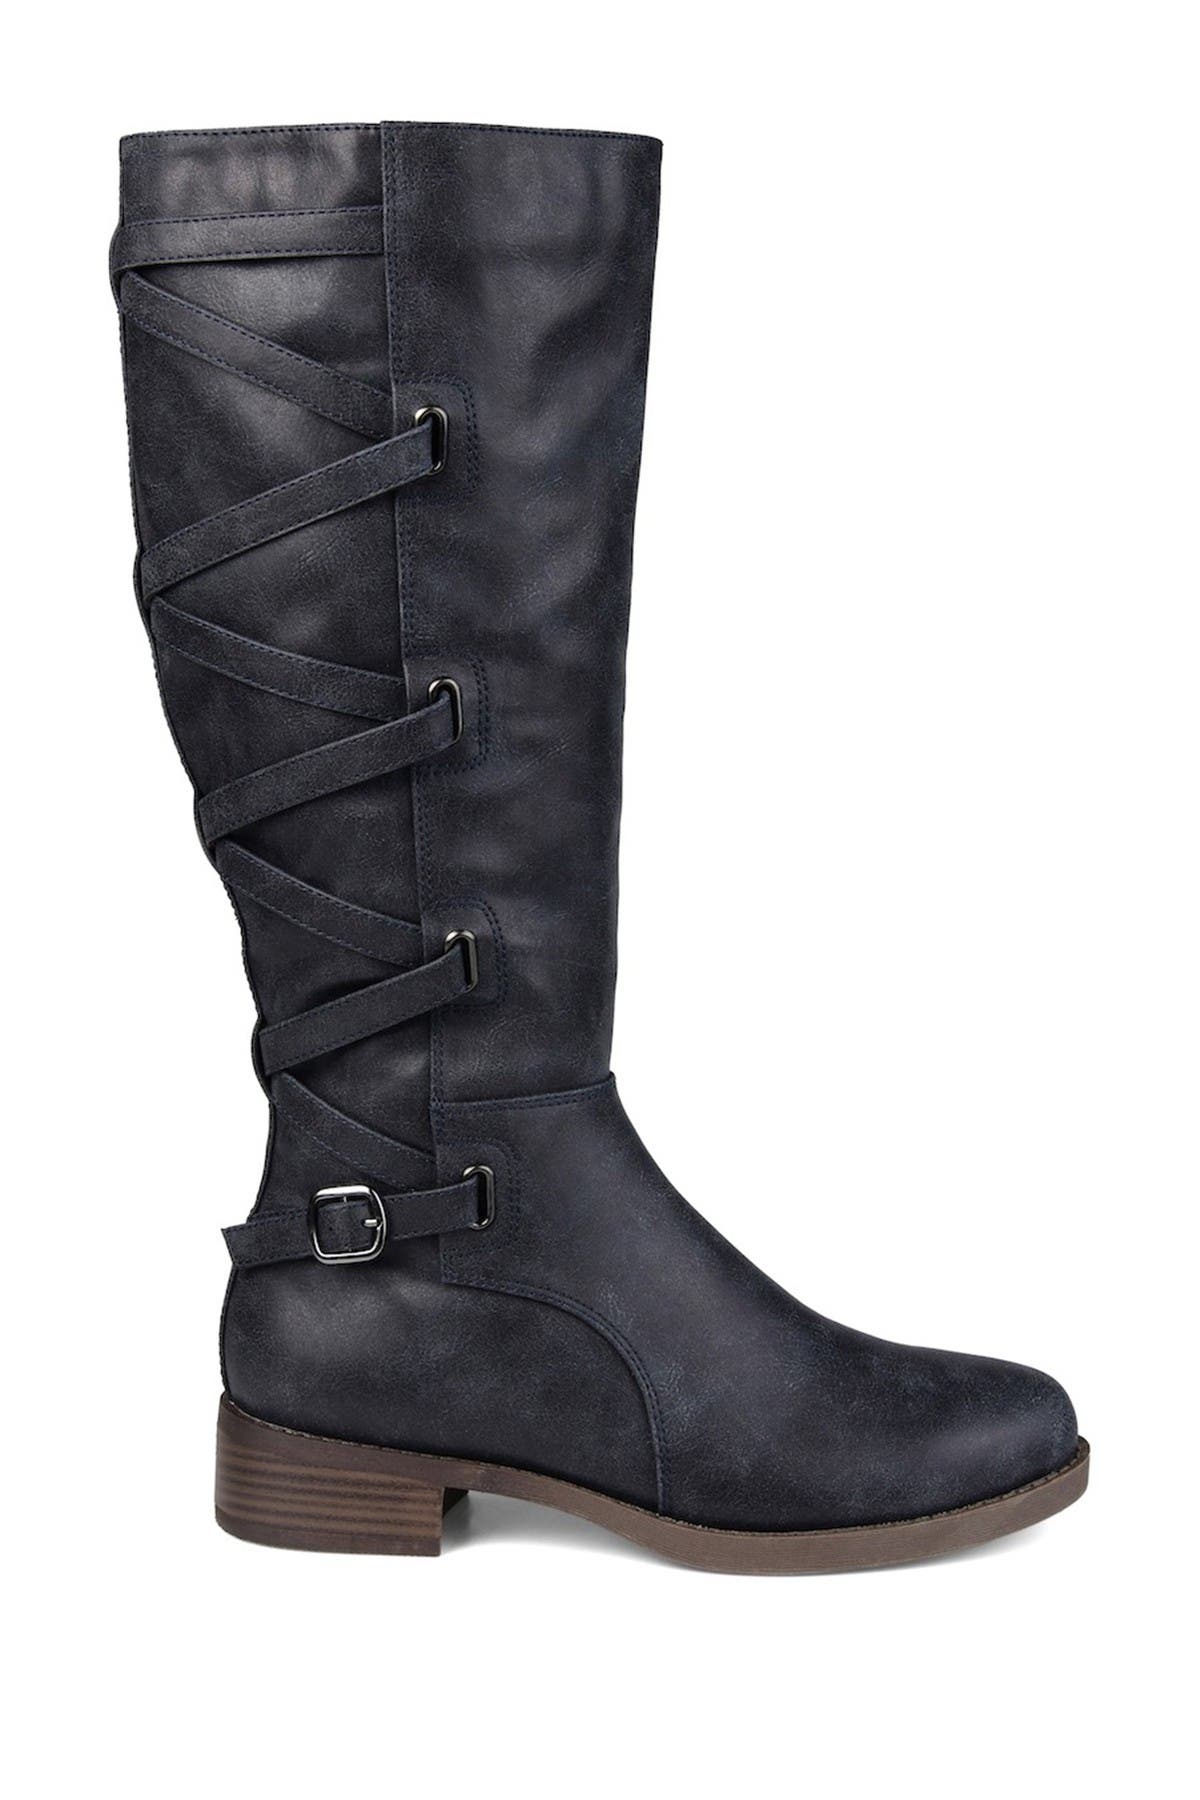 Journee Collection Carly Lace Back Boot In Navy2